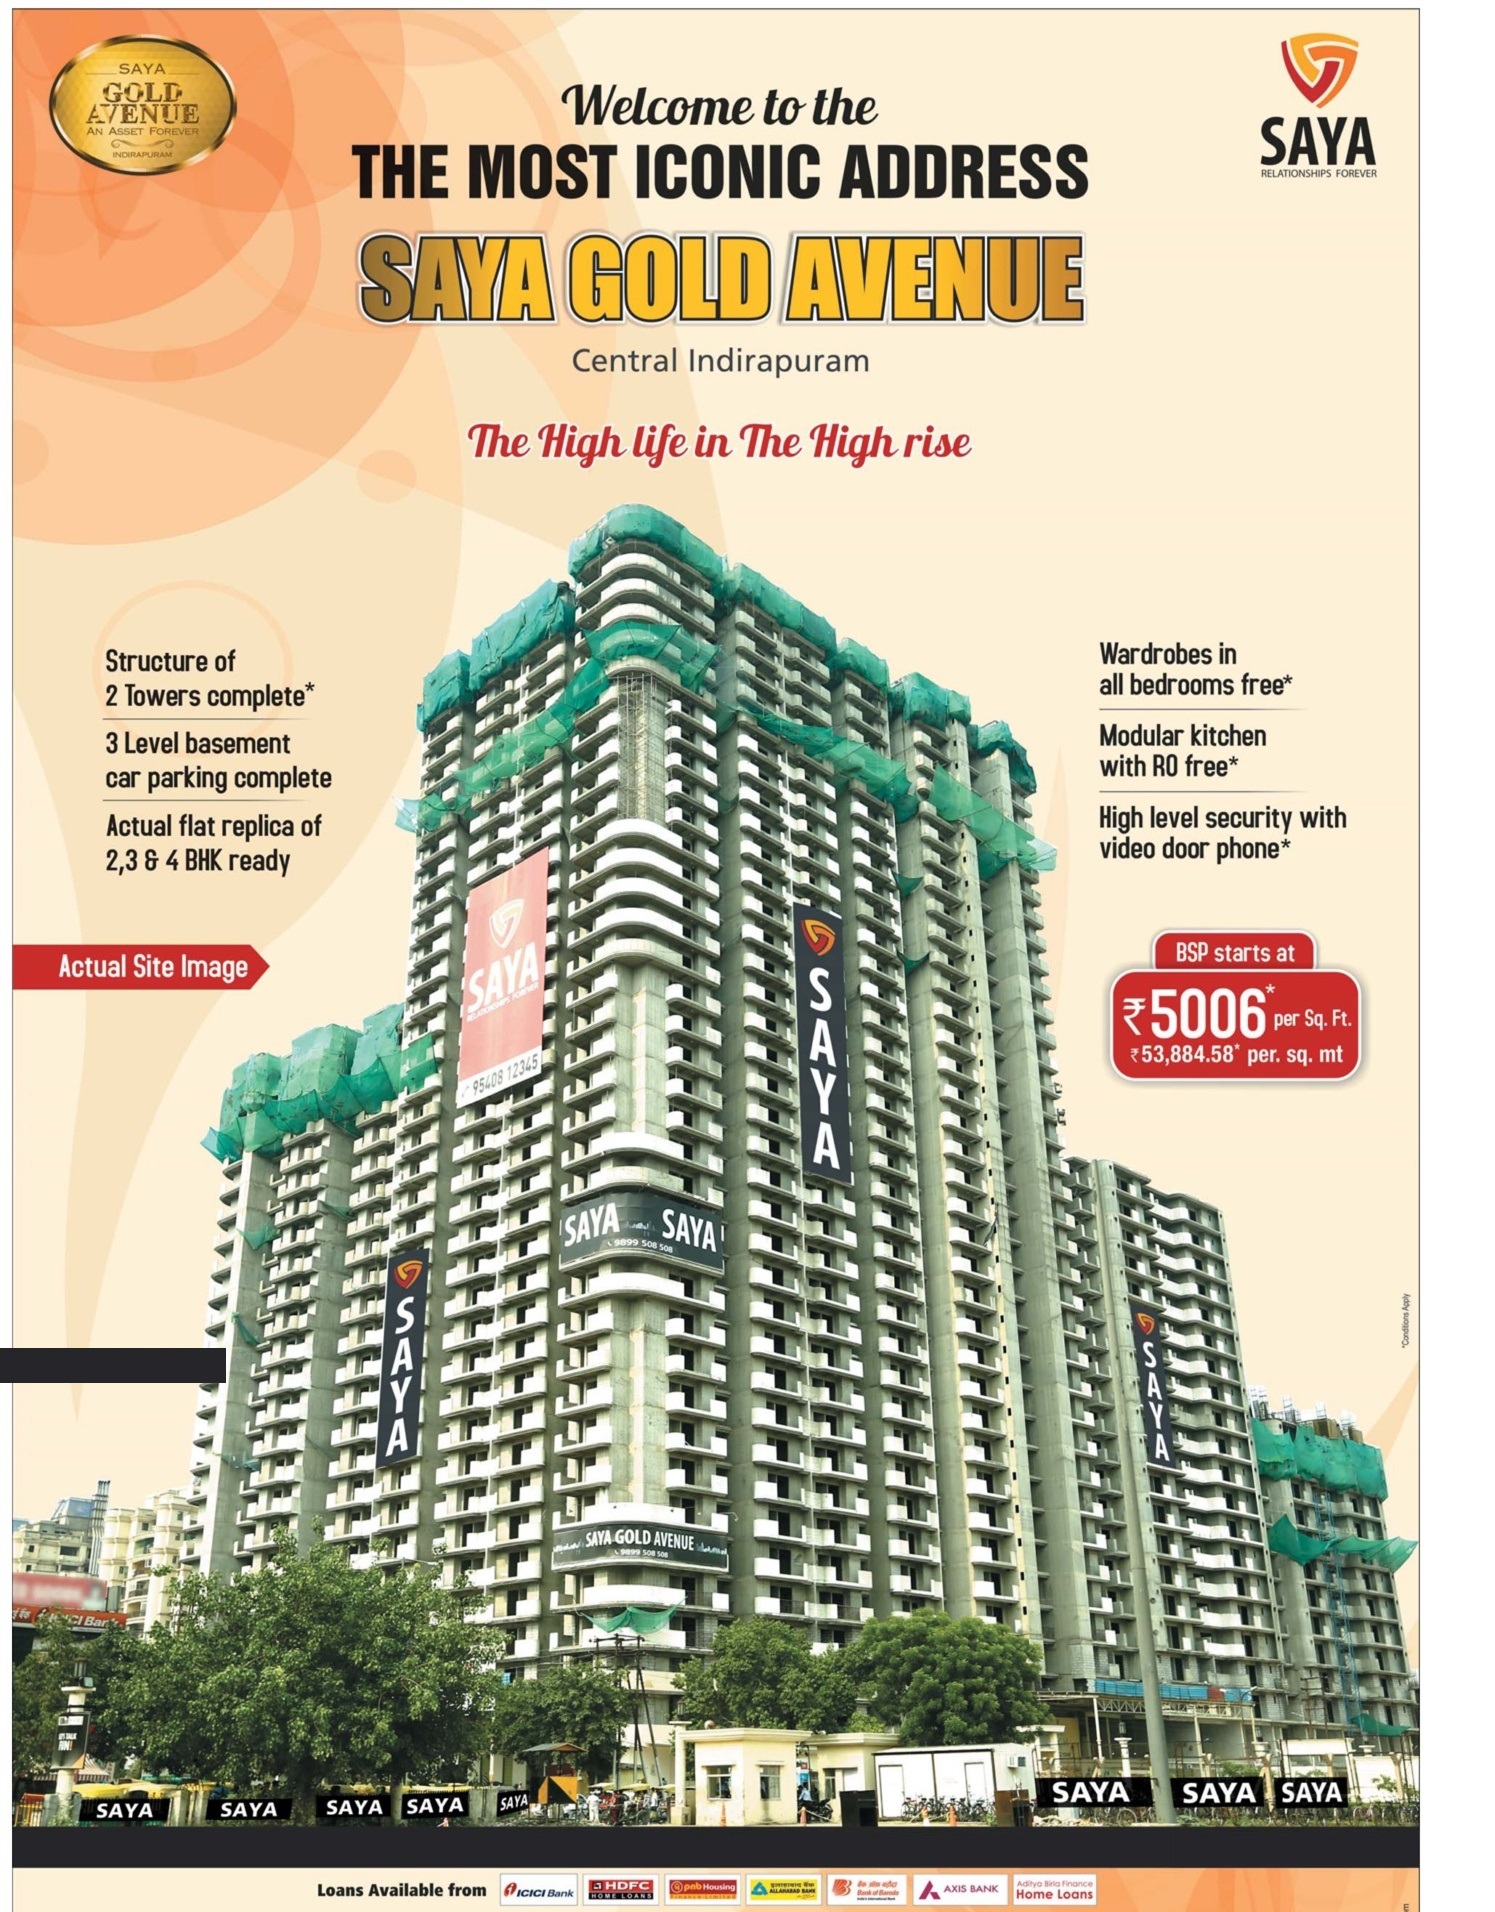 Welcome to the Most Iconic Address Saya Gold Avenue, Ghaziabad Update